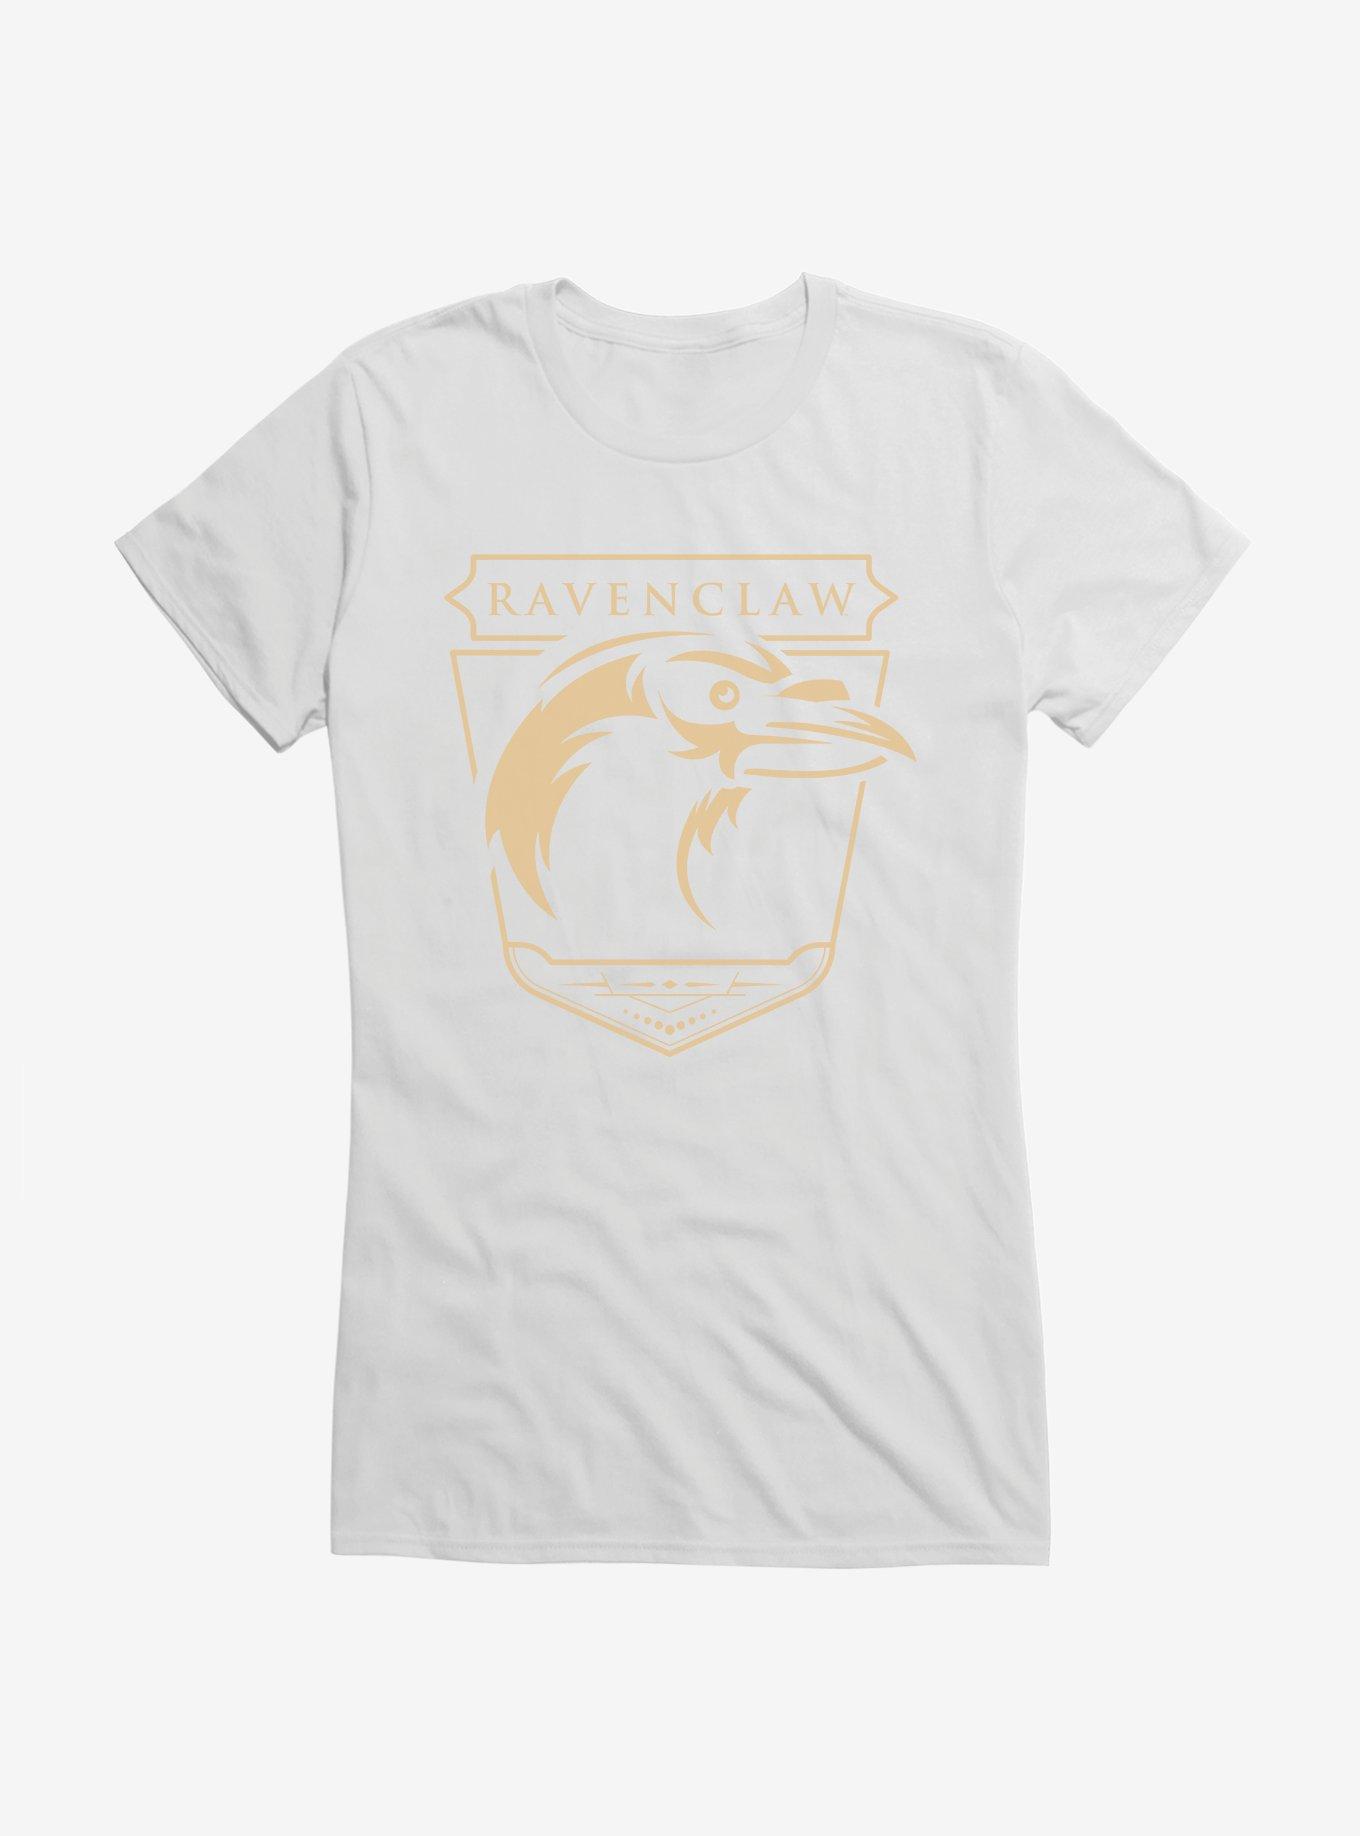 Harry Potter Magical Mischief Ravenclaw Girls T-Shirt, WHITE, hi-res